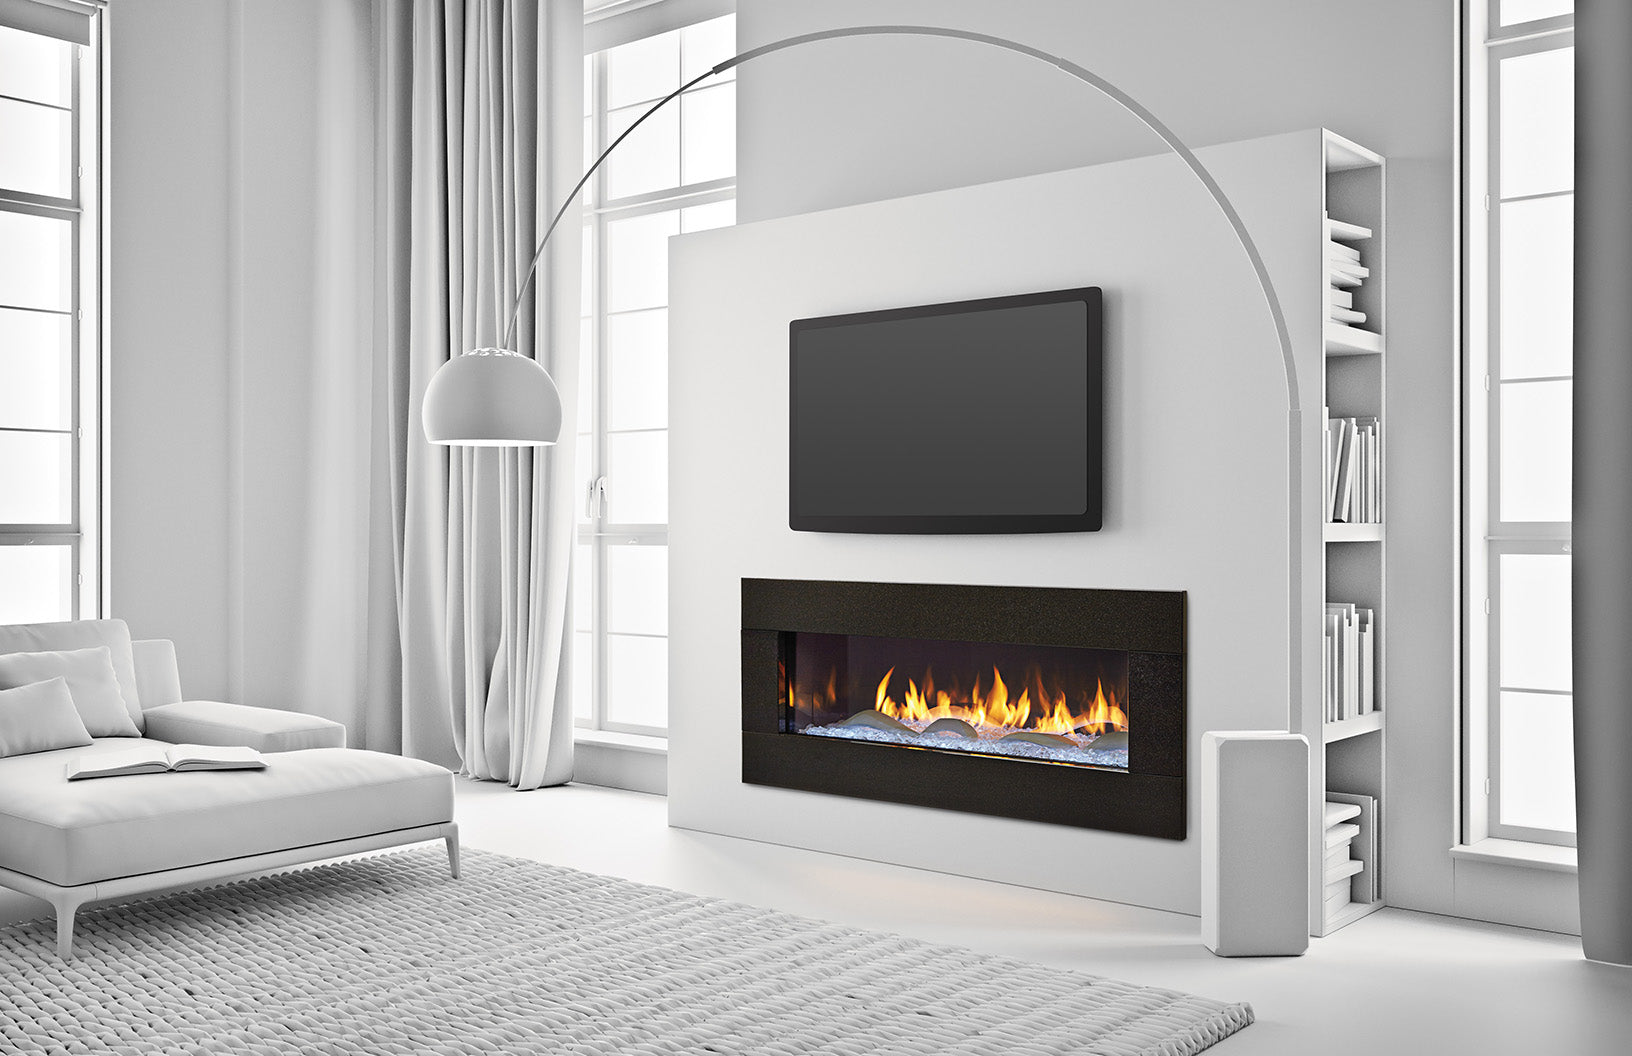 HOW MUCH IT COSTS TO RUN A GAS FIREPLACE?